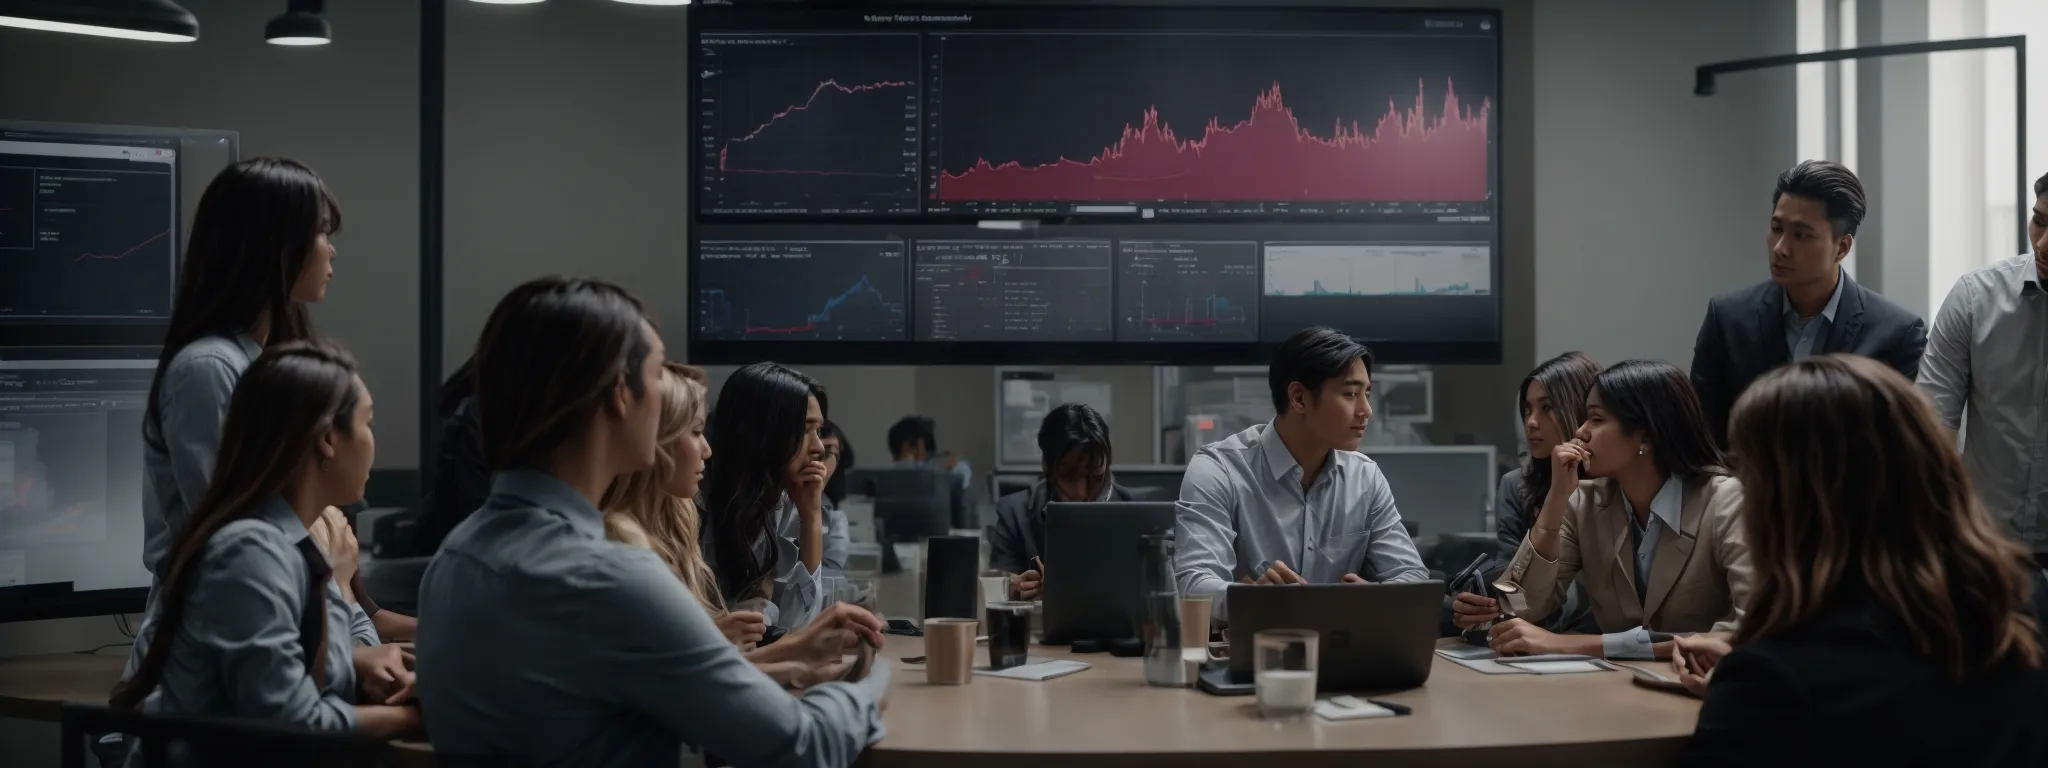 a modern marketing team reviews analytics on a large screen showing the uptrend in brand engagement following their latest integrated advertising campaign.